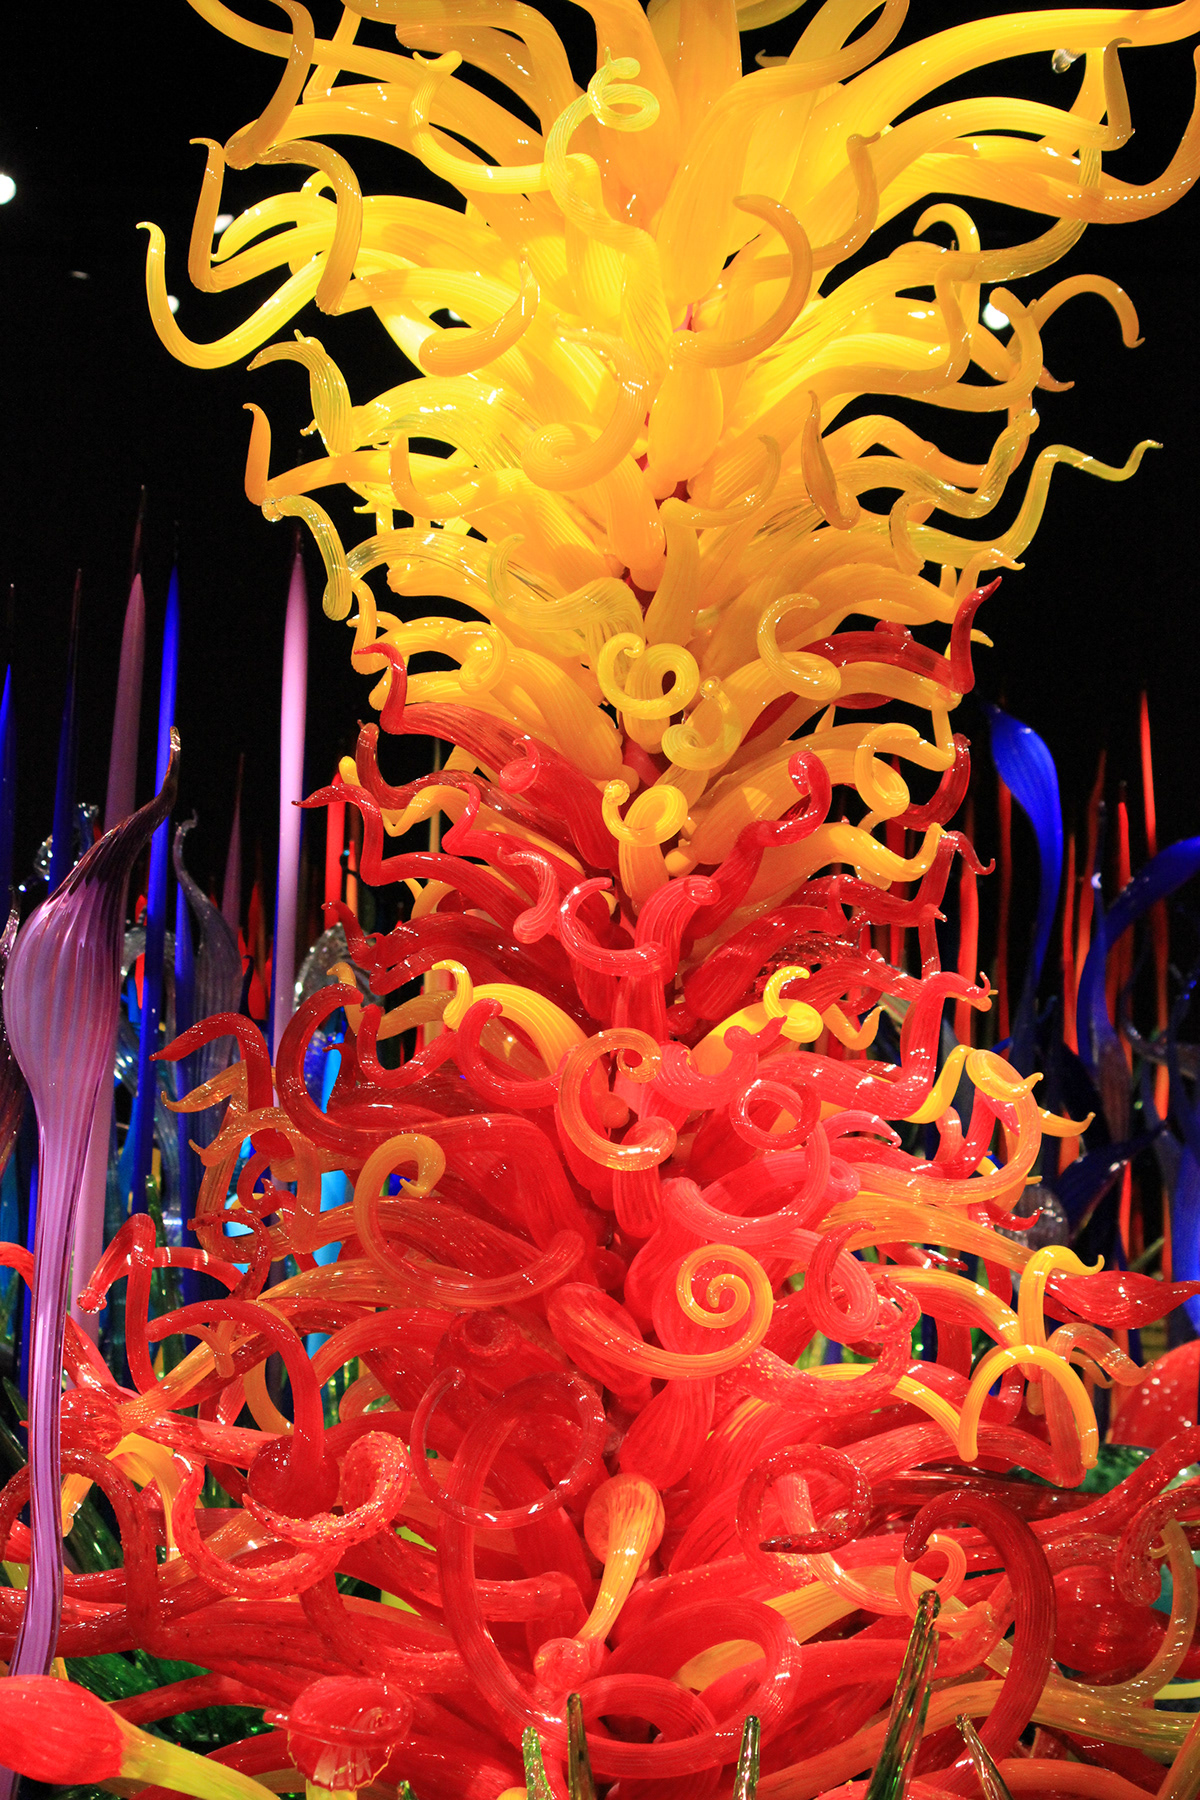 Chihuly Garden & glass